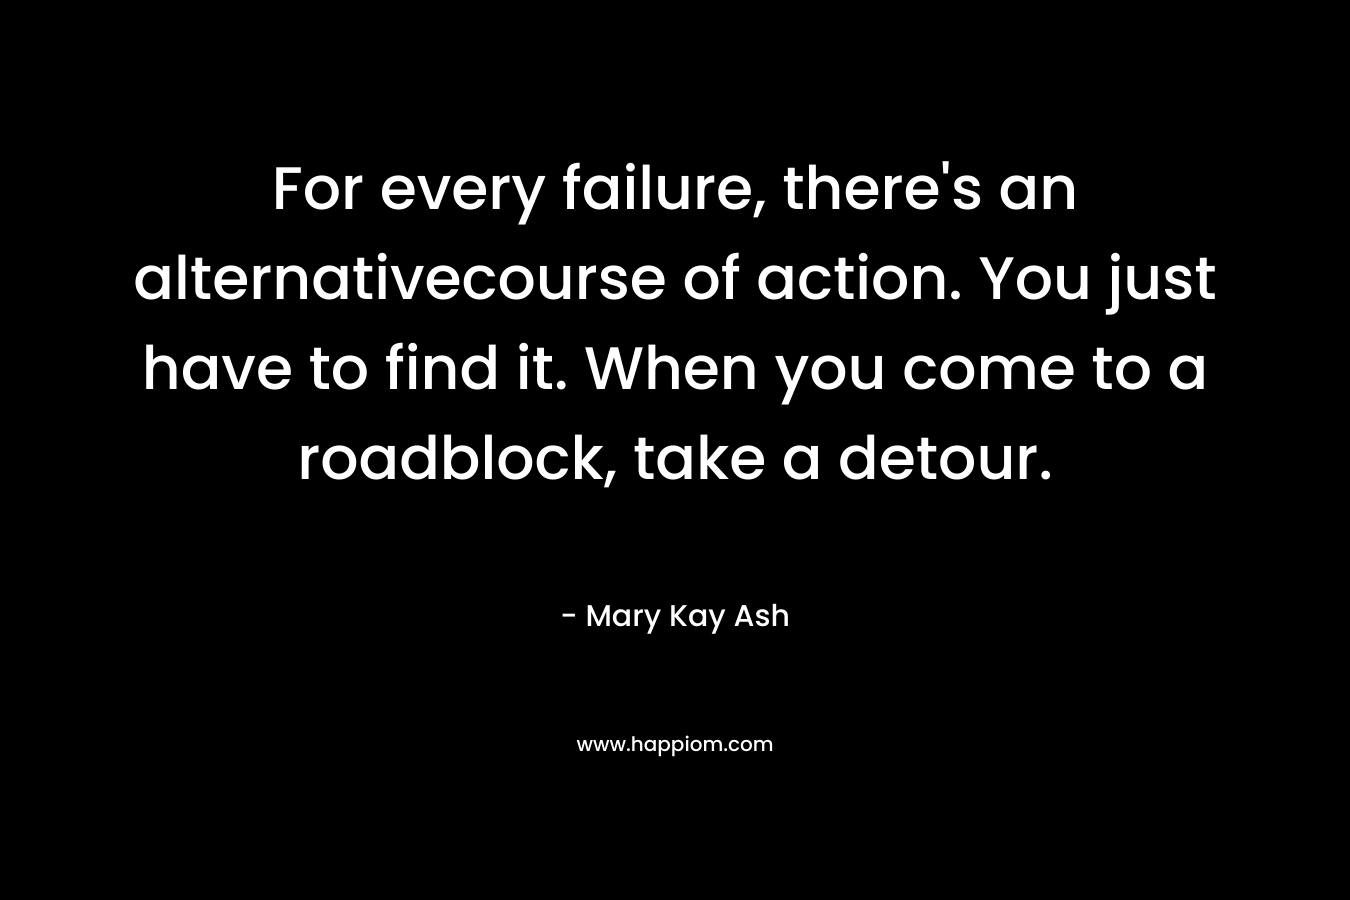 For every failure, there’s an alternativecourse of action. You just have to find it. When you come to a roadblock, take a detour. – Mary Kay Ash